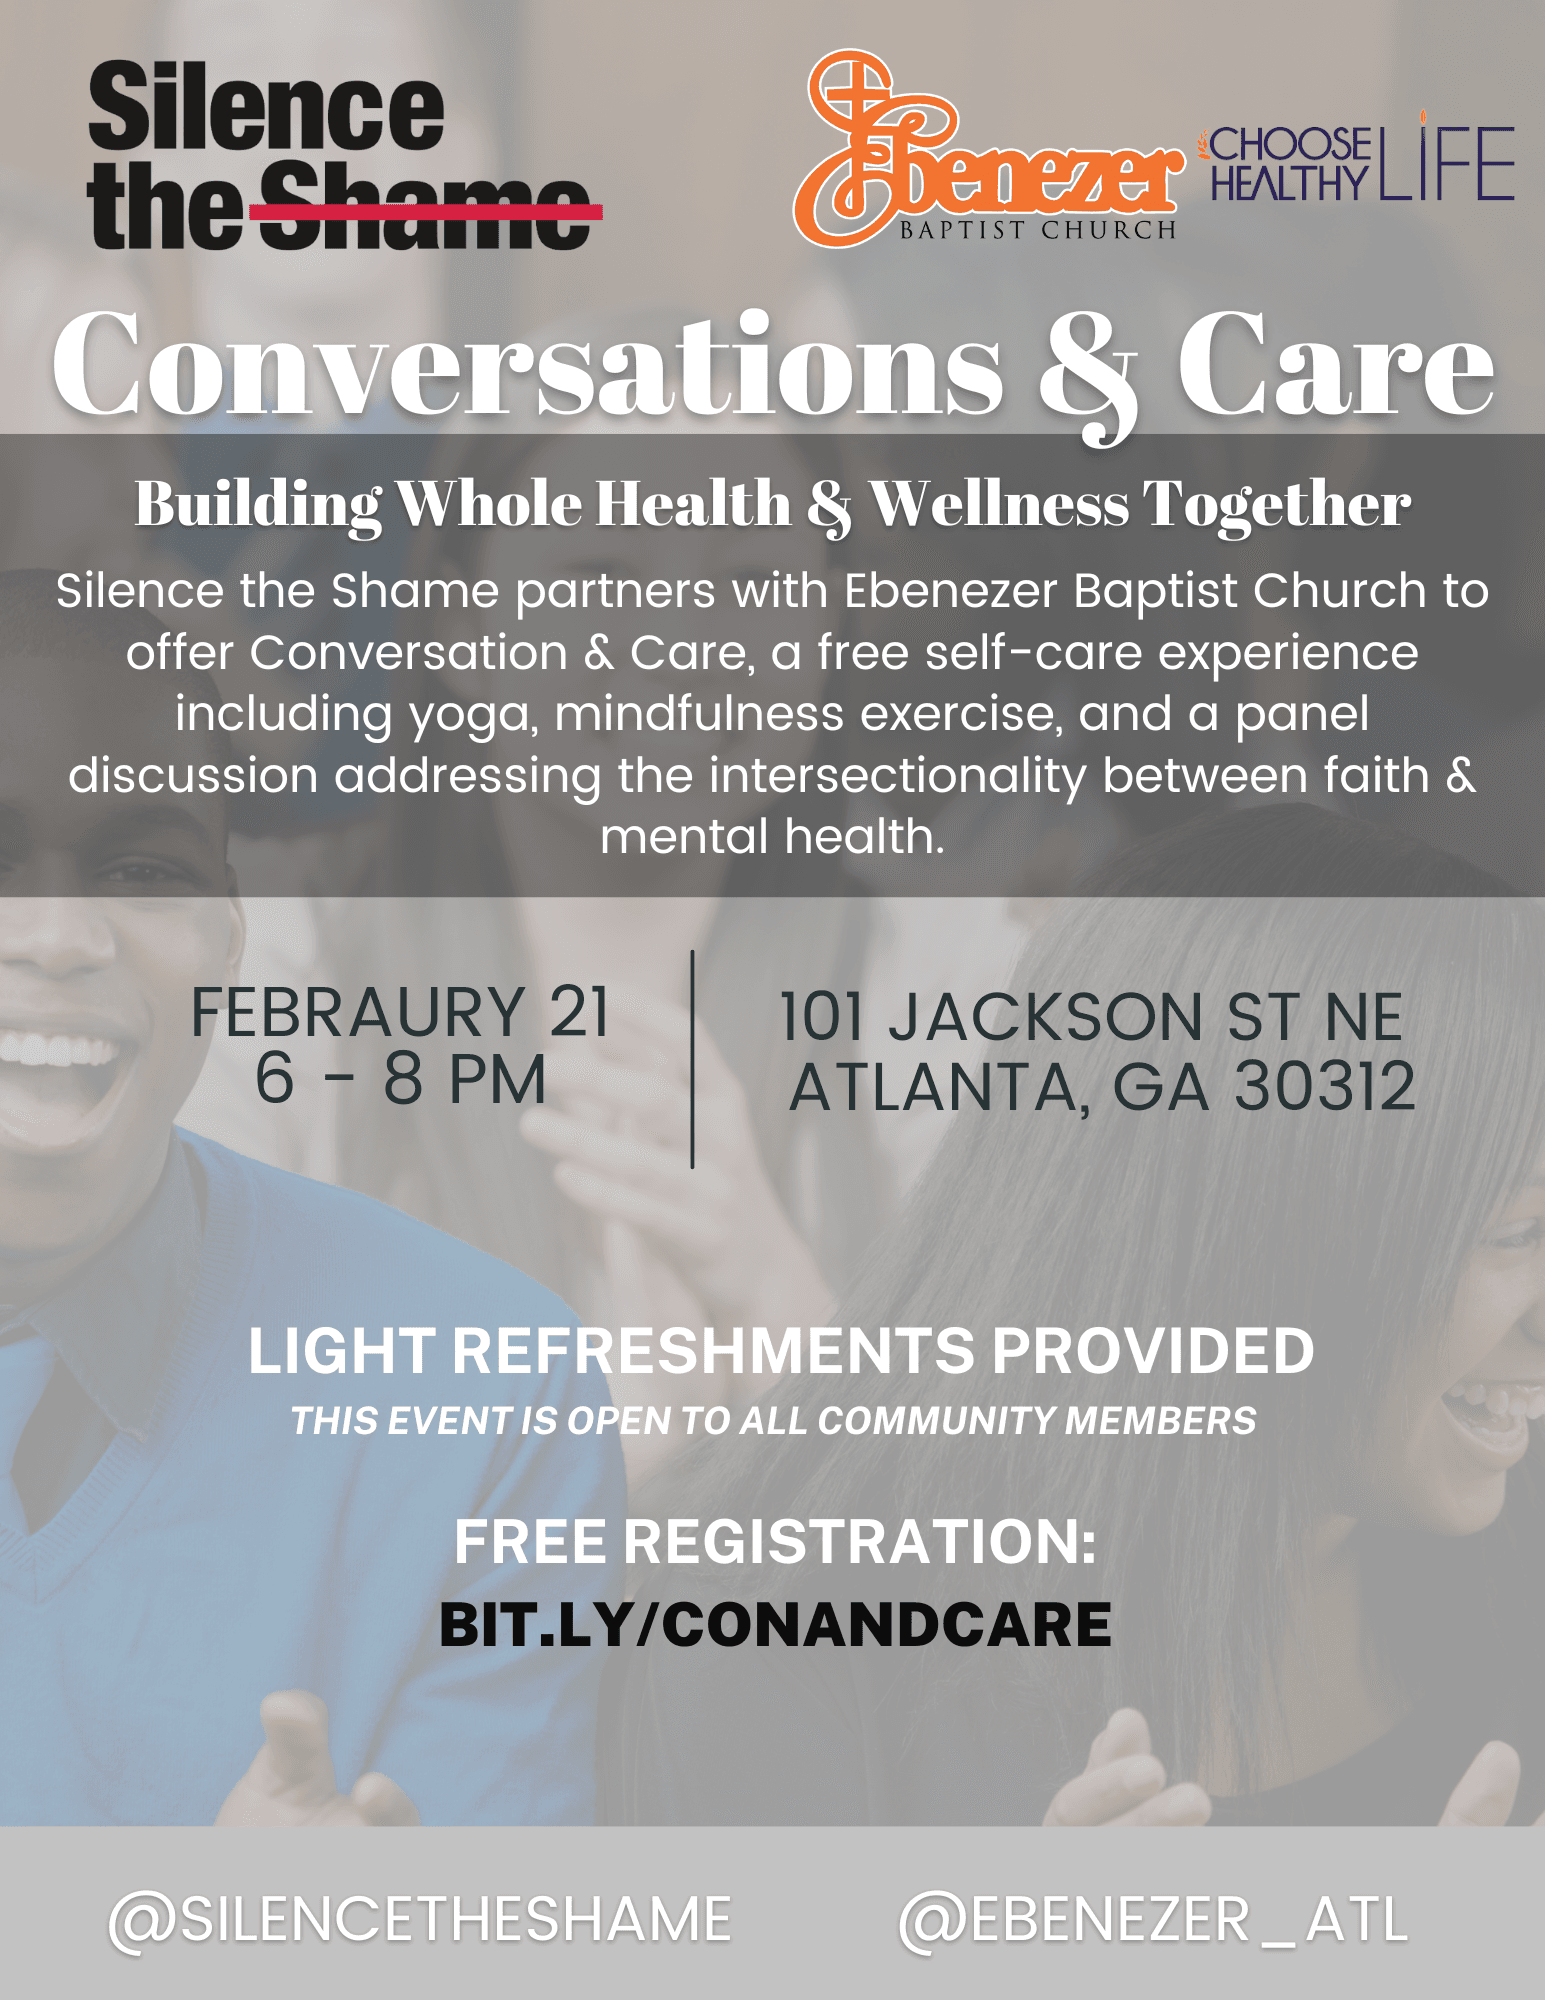 February 21st: Conversations & Care